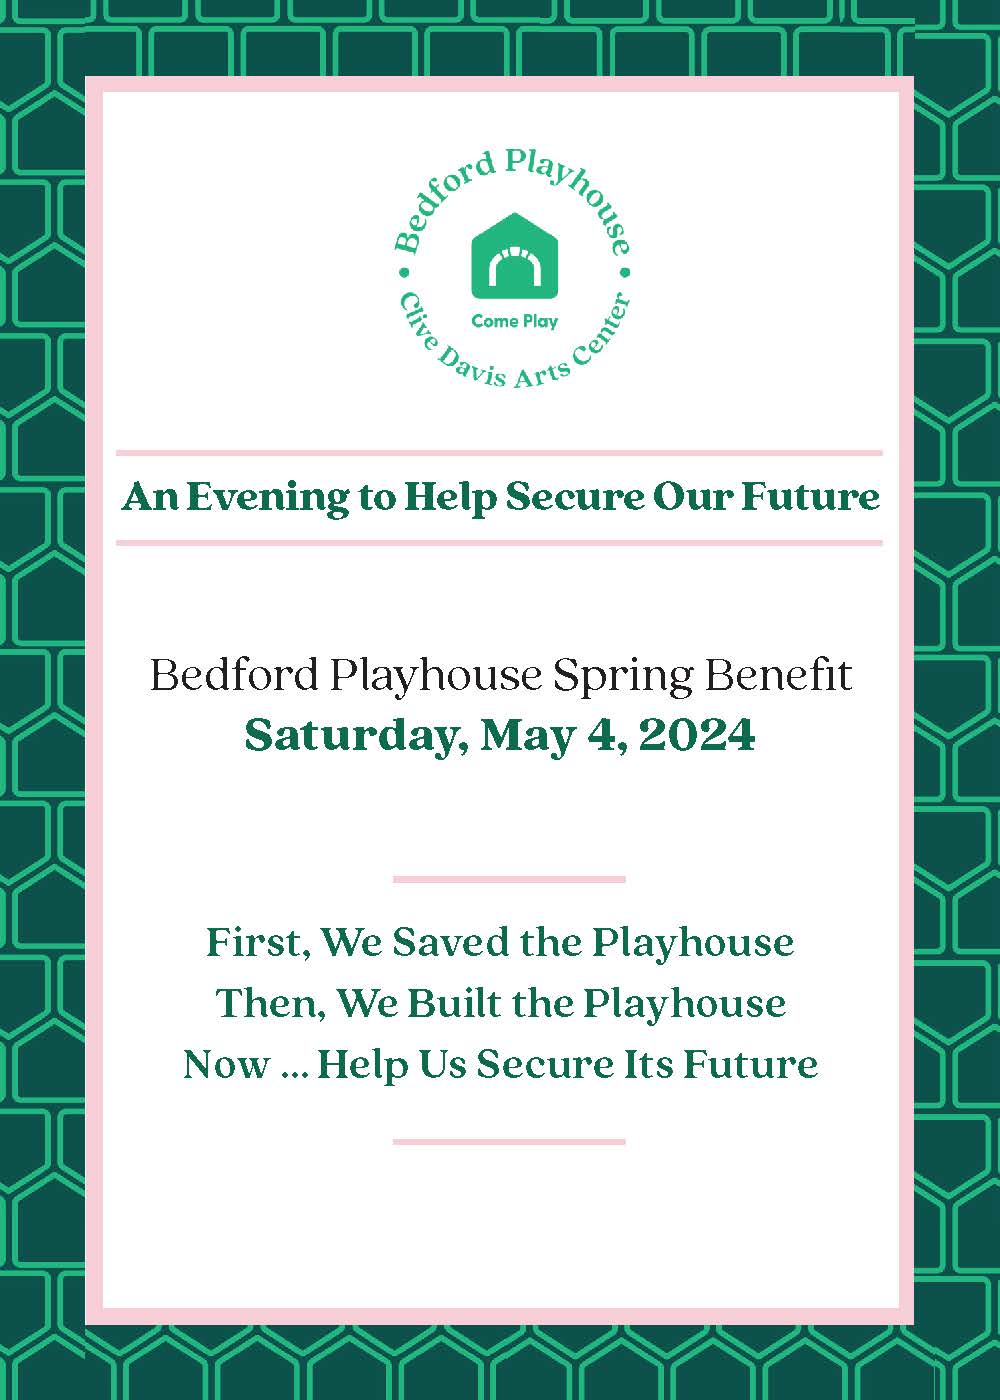 Bedford Playhouse Spring Benefit: An Evening to Help Secure Our Future